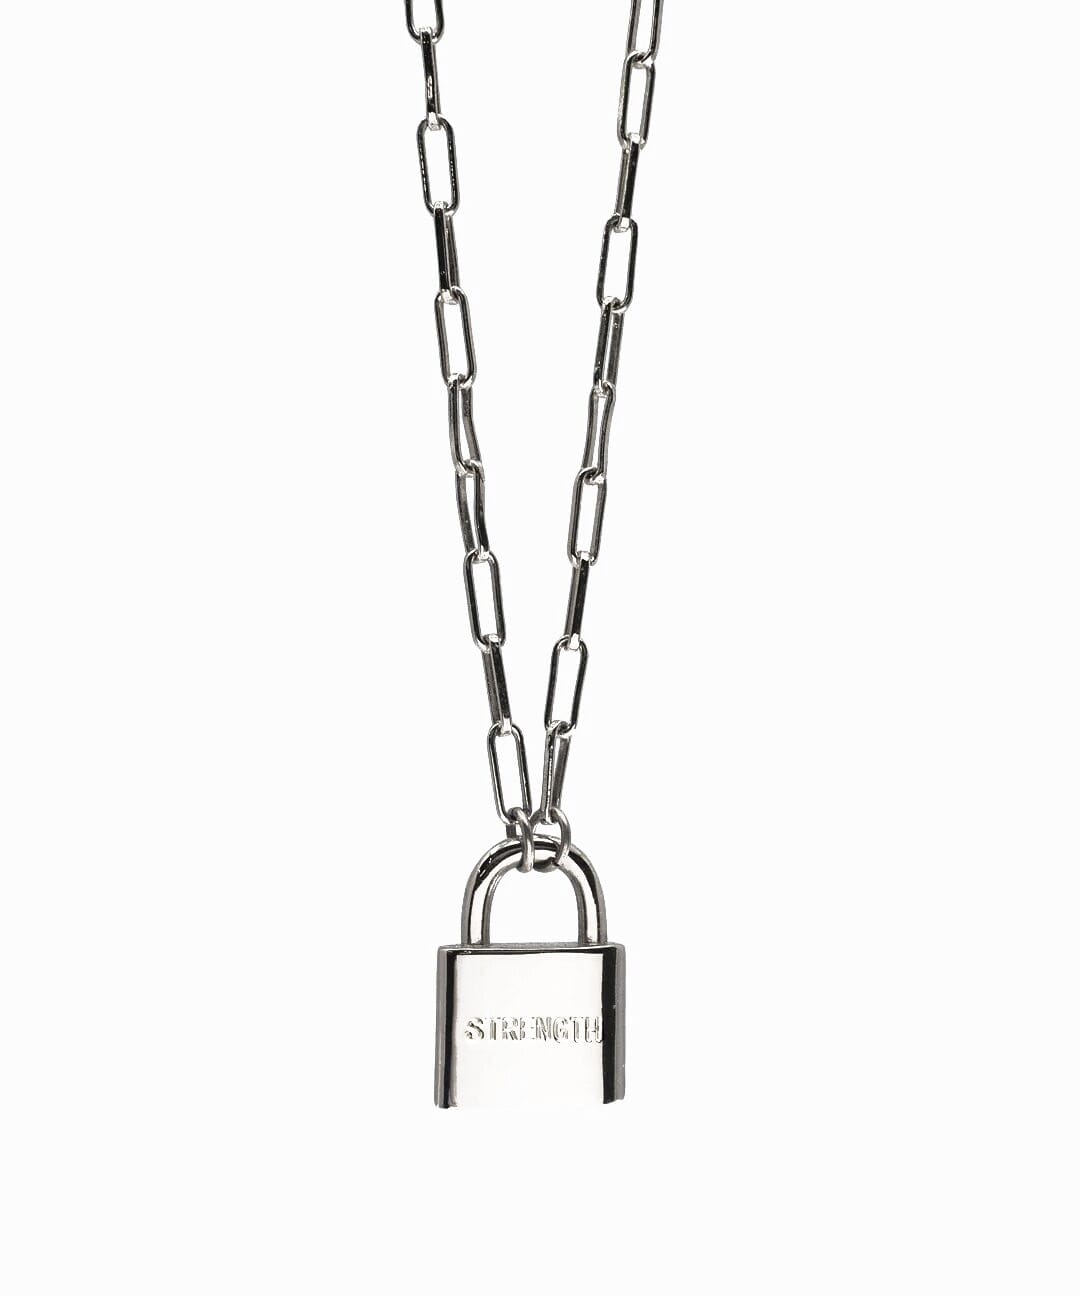 Brooklyn Padlock Necklace Necklaces The Giving Keys STRENGTH SILVER 